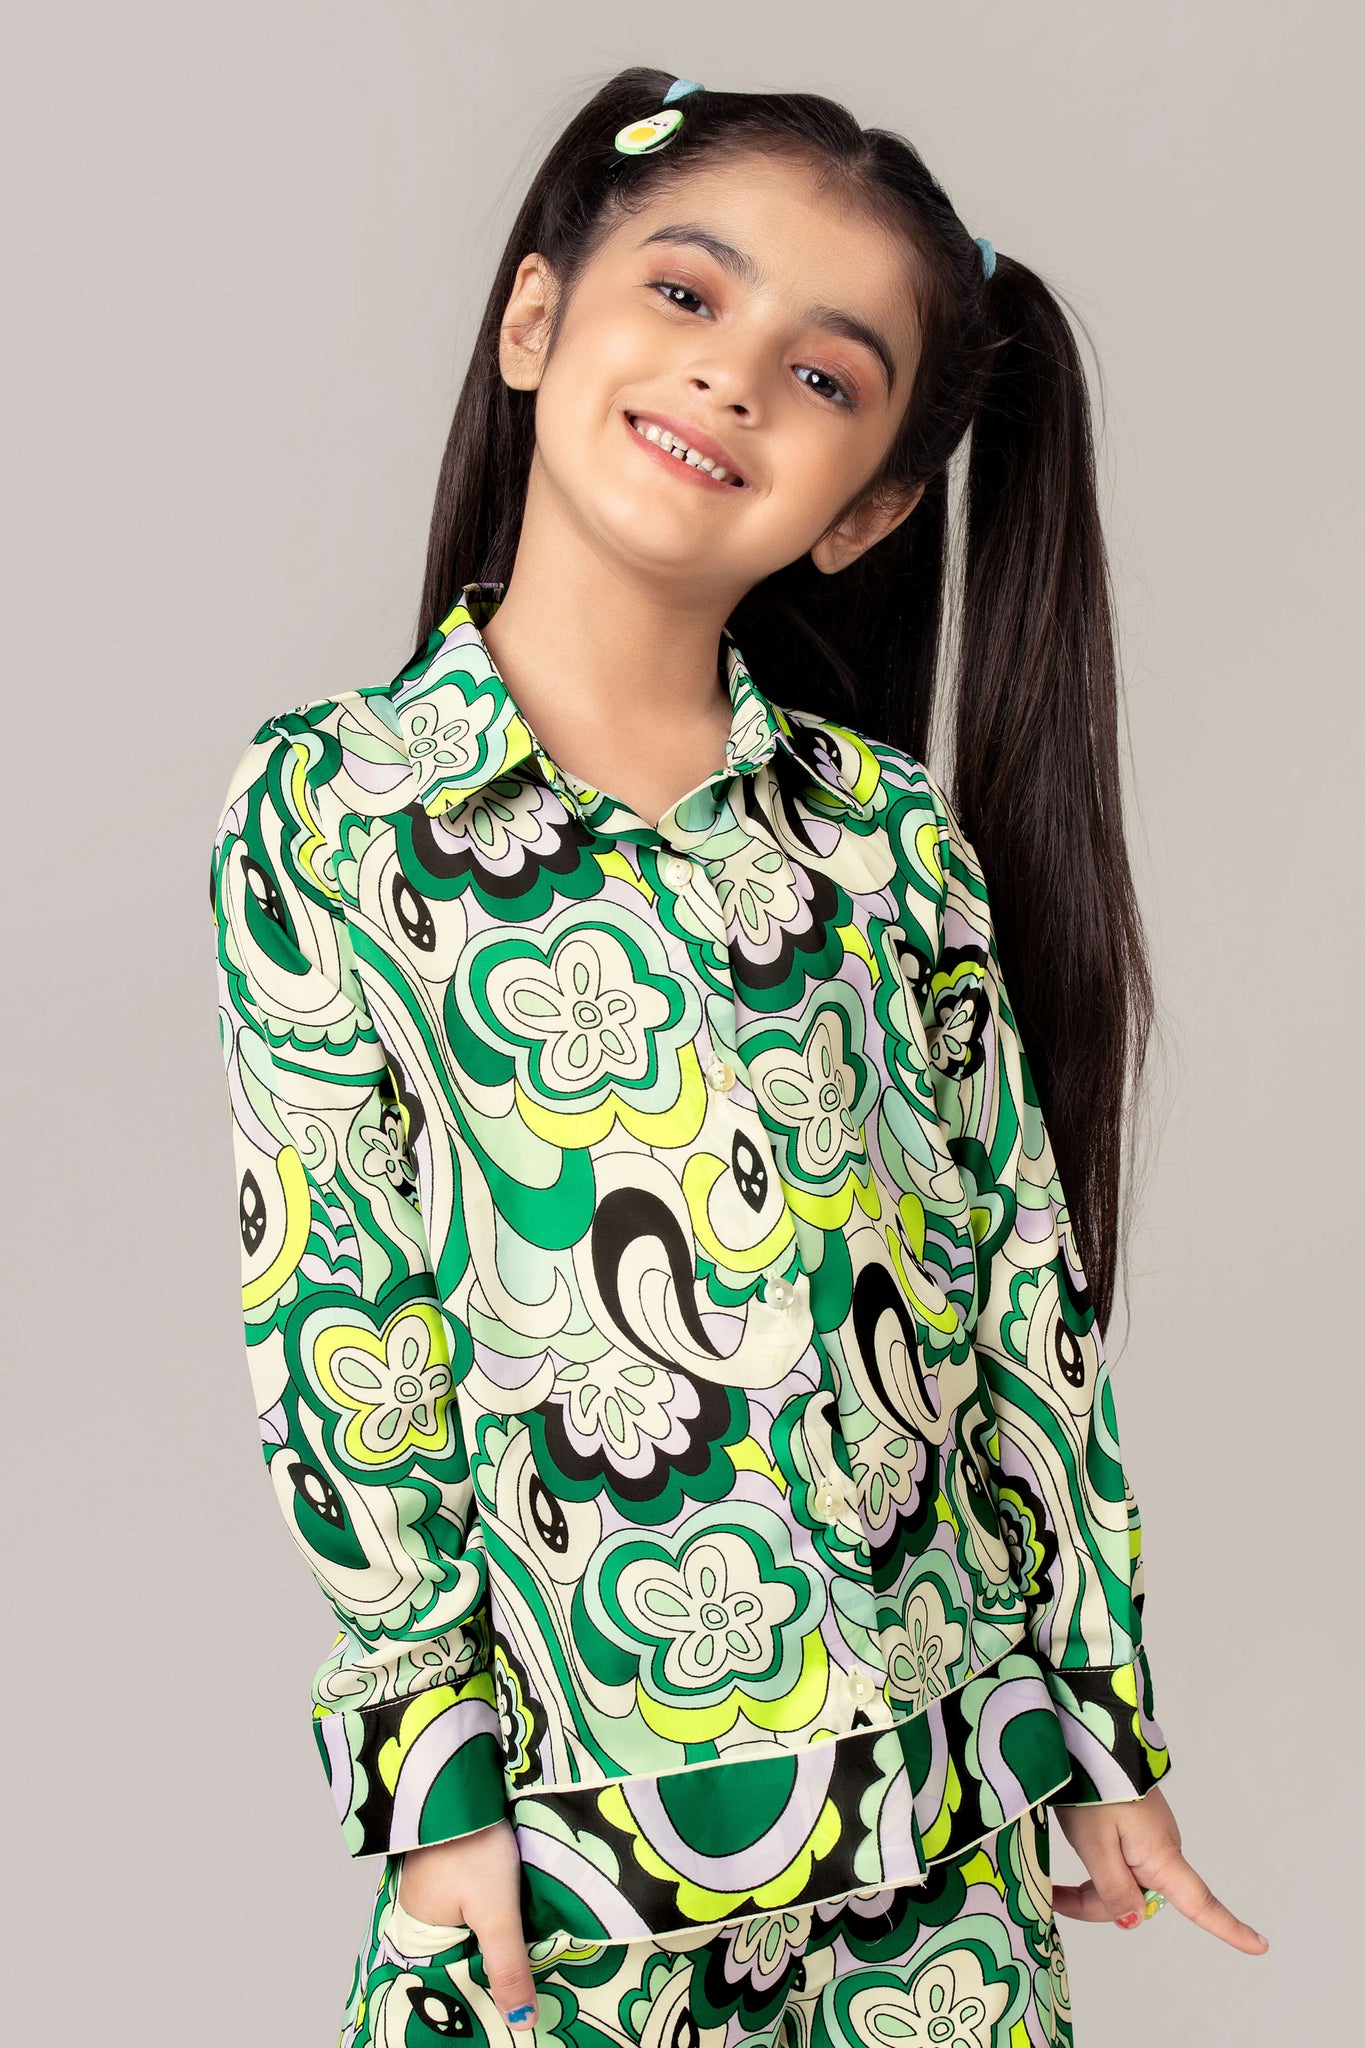 Abstract Collar Neck Shirt For Girls